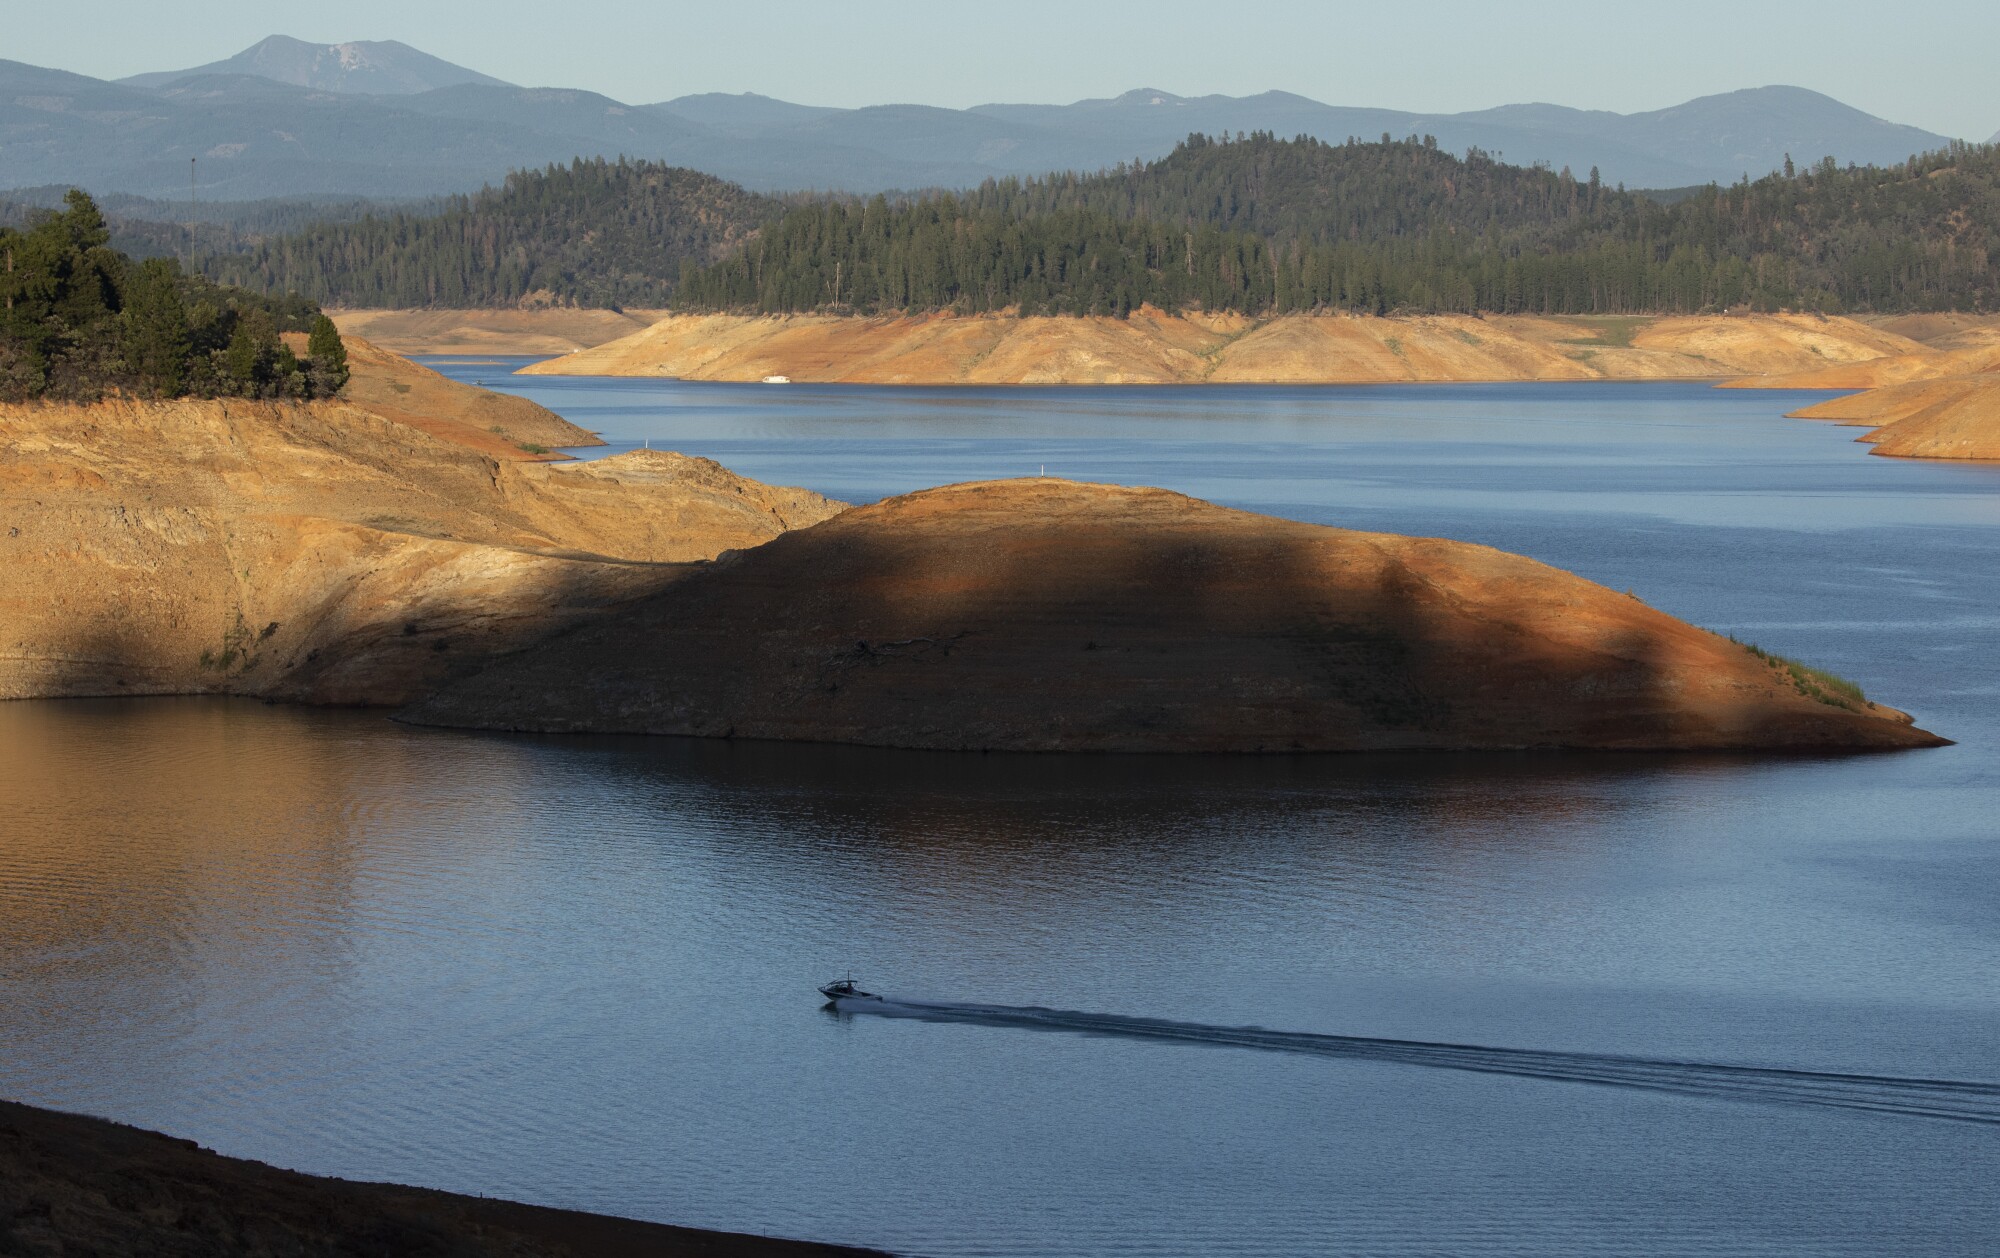 A powerboat sails through the receding waters of Lake Shasta.